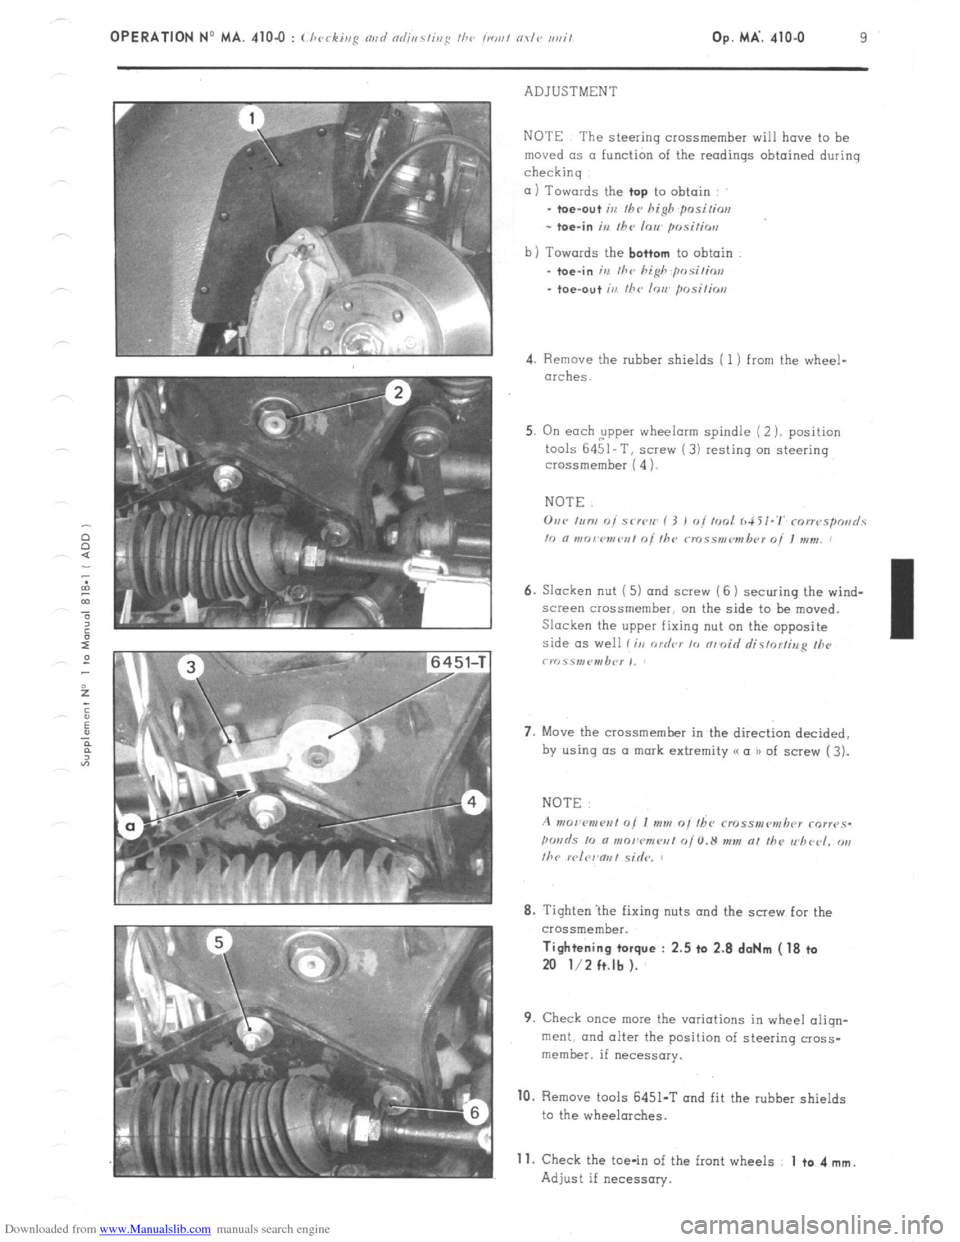 Citroen CX 1981 1.G Workshop Manual Downloaded from www.Manualslib.com manuals search engine OPERATION No MA. 4104 : (./ , k’  1<c a,,g I,<  n / nd;i,,s/i,,g I/><, jr.or,/ ovl<, ,,i,it Op. MA’. 410-O 9 
ADJUSTMENT 
NOTE The steering